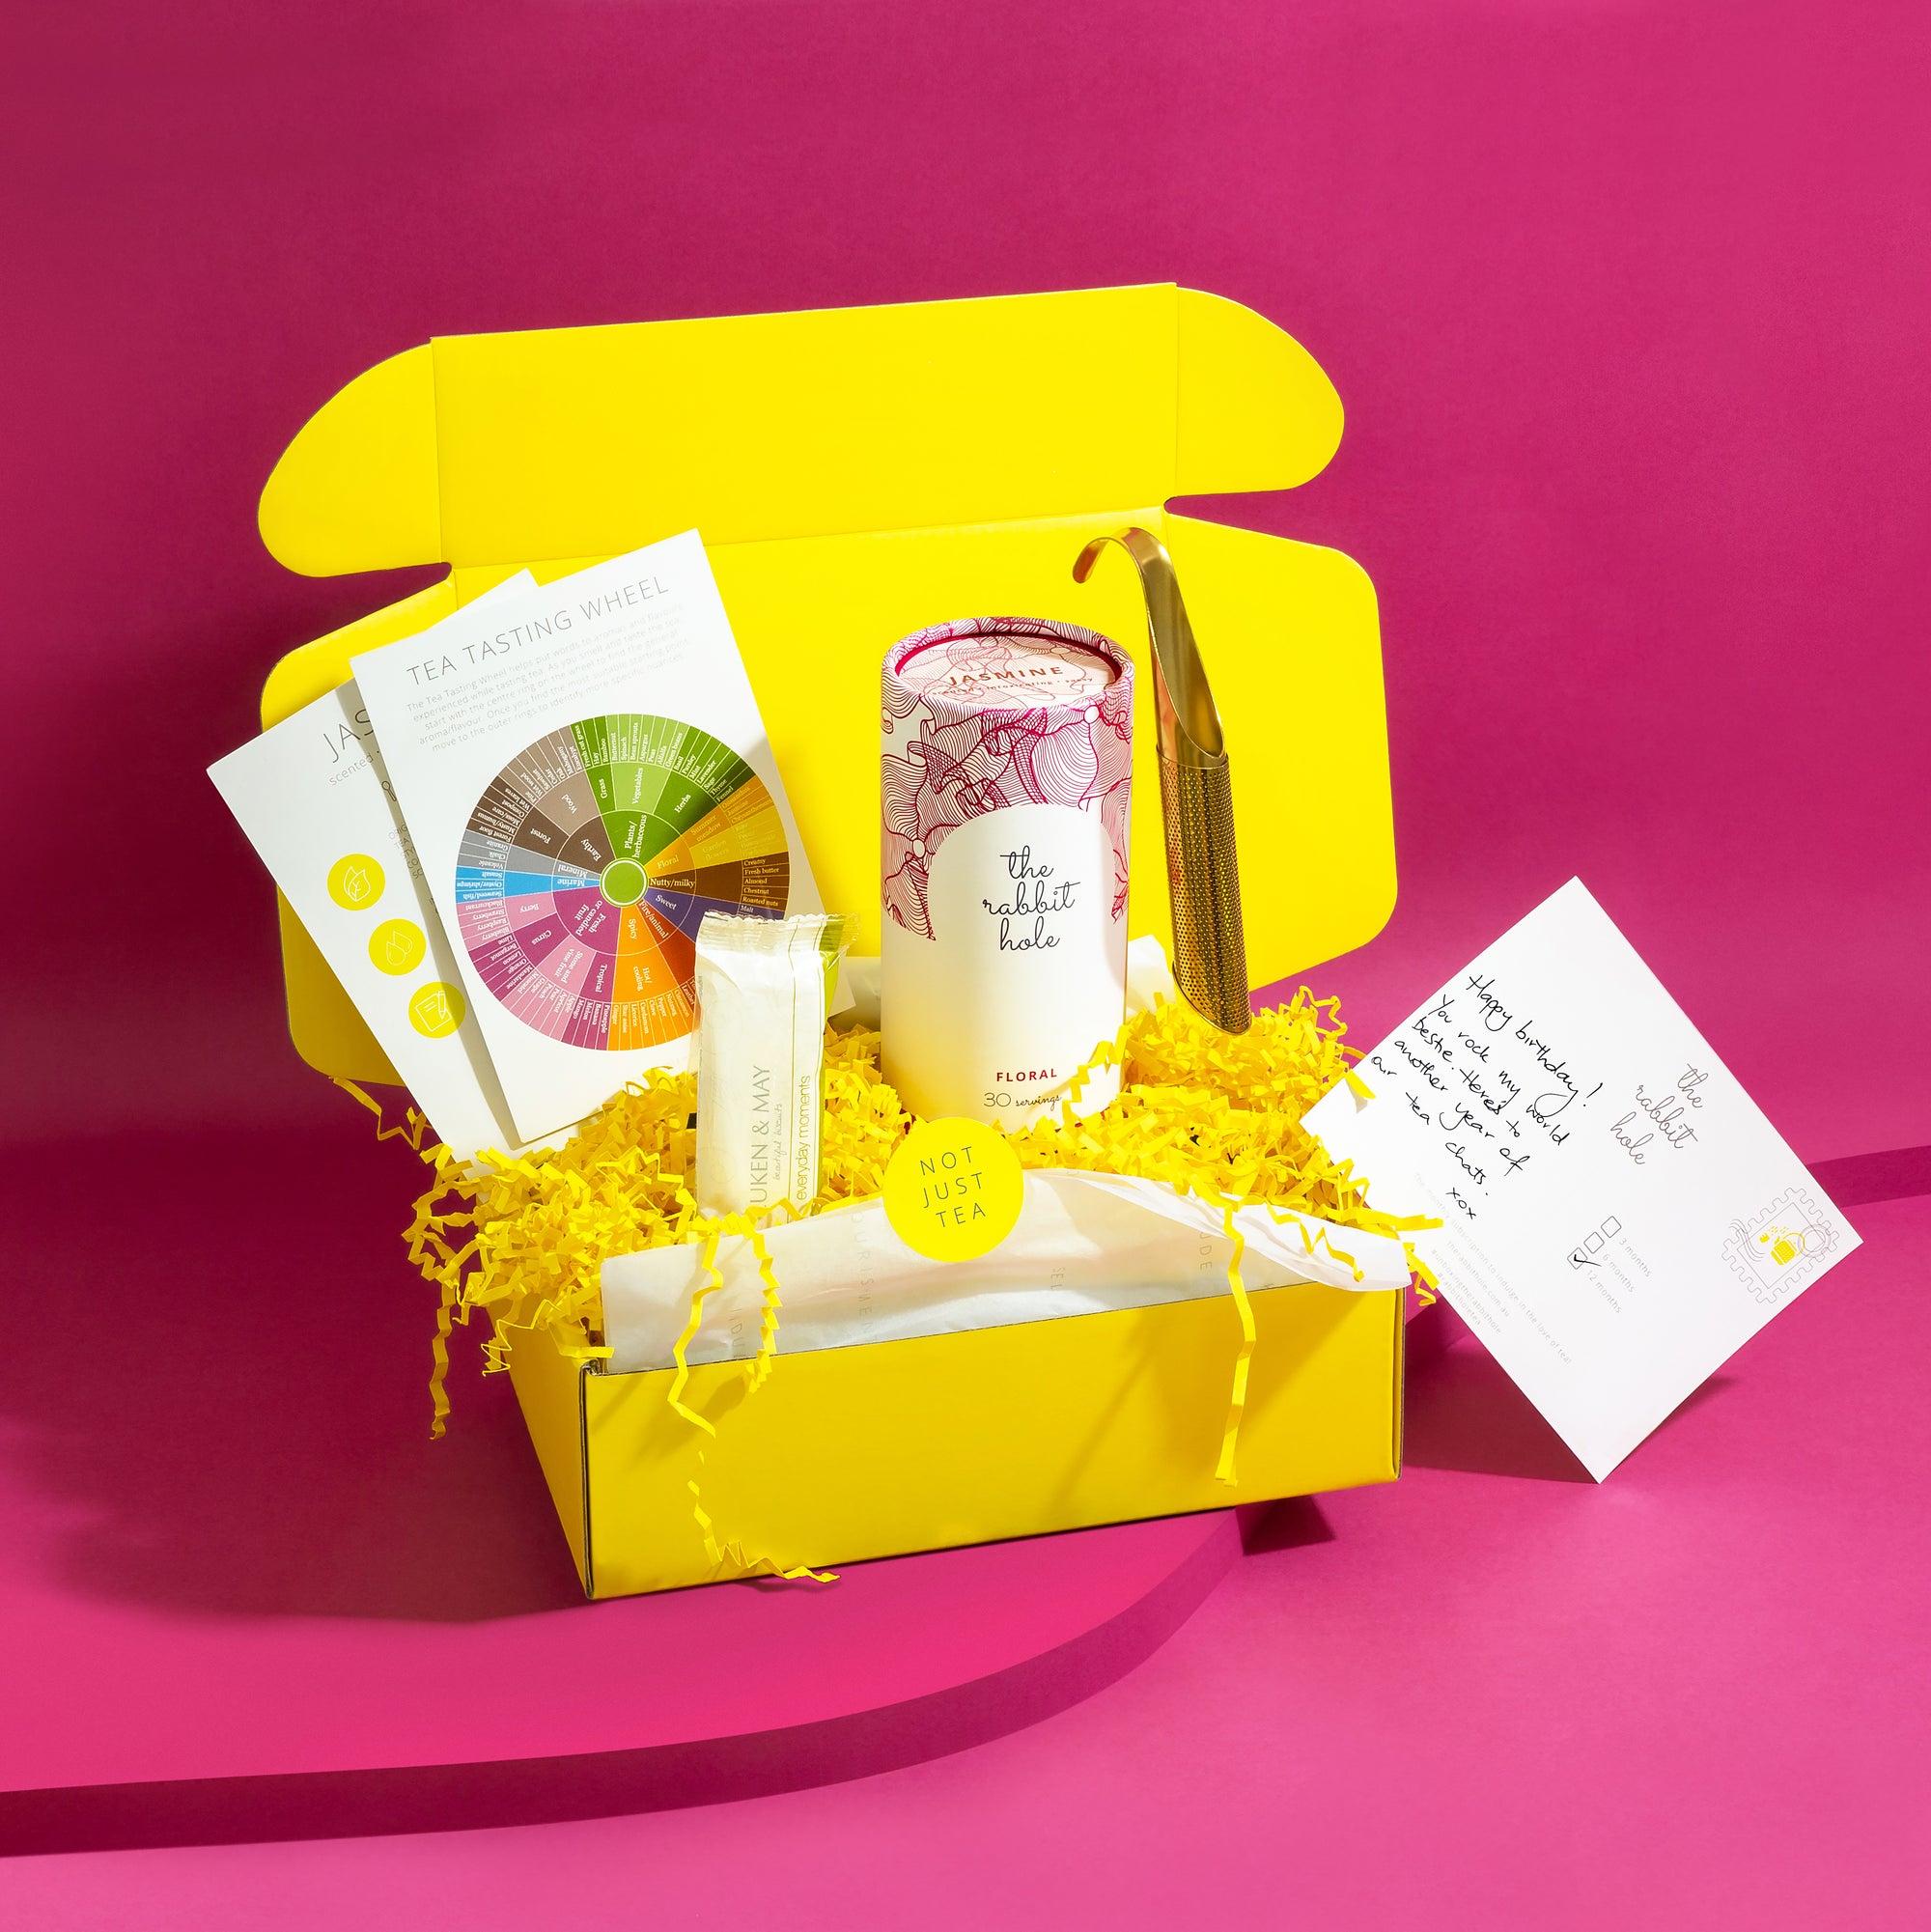 Tea mail by The Rabbit Hole - monthly tea subscription in yellow gift box on bright pink background.